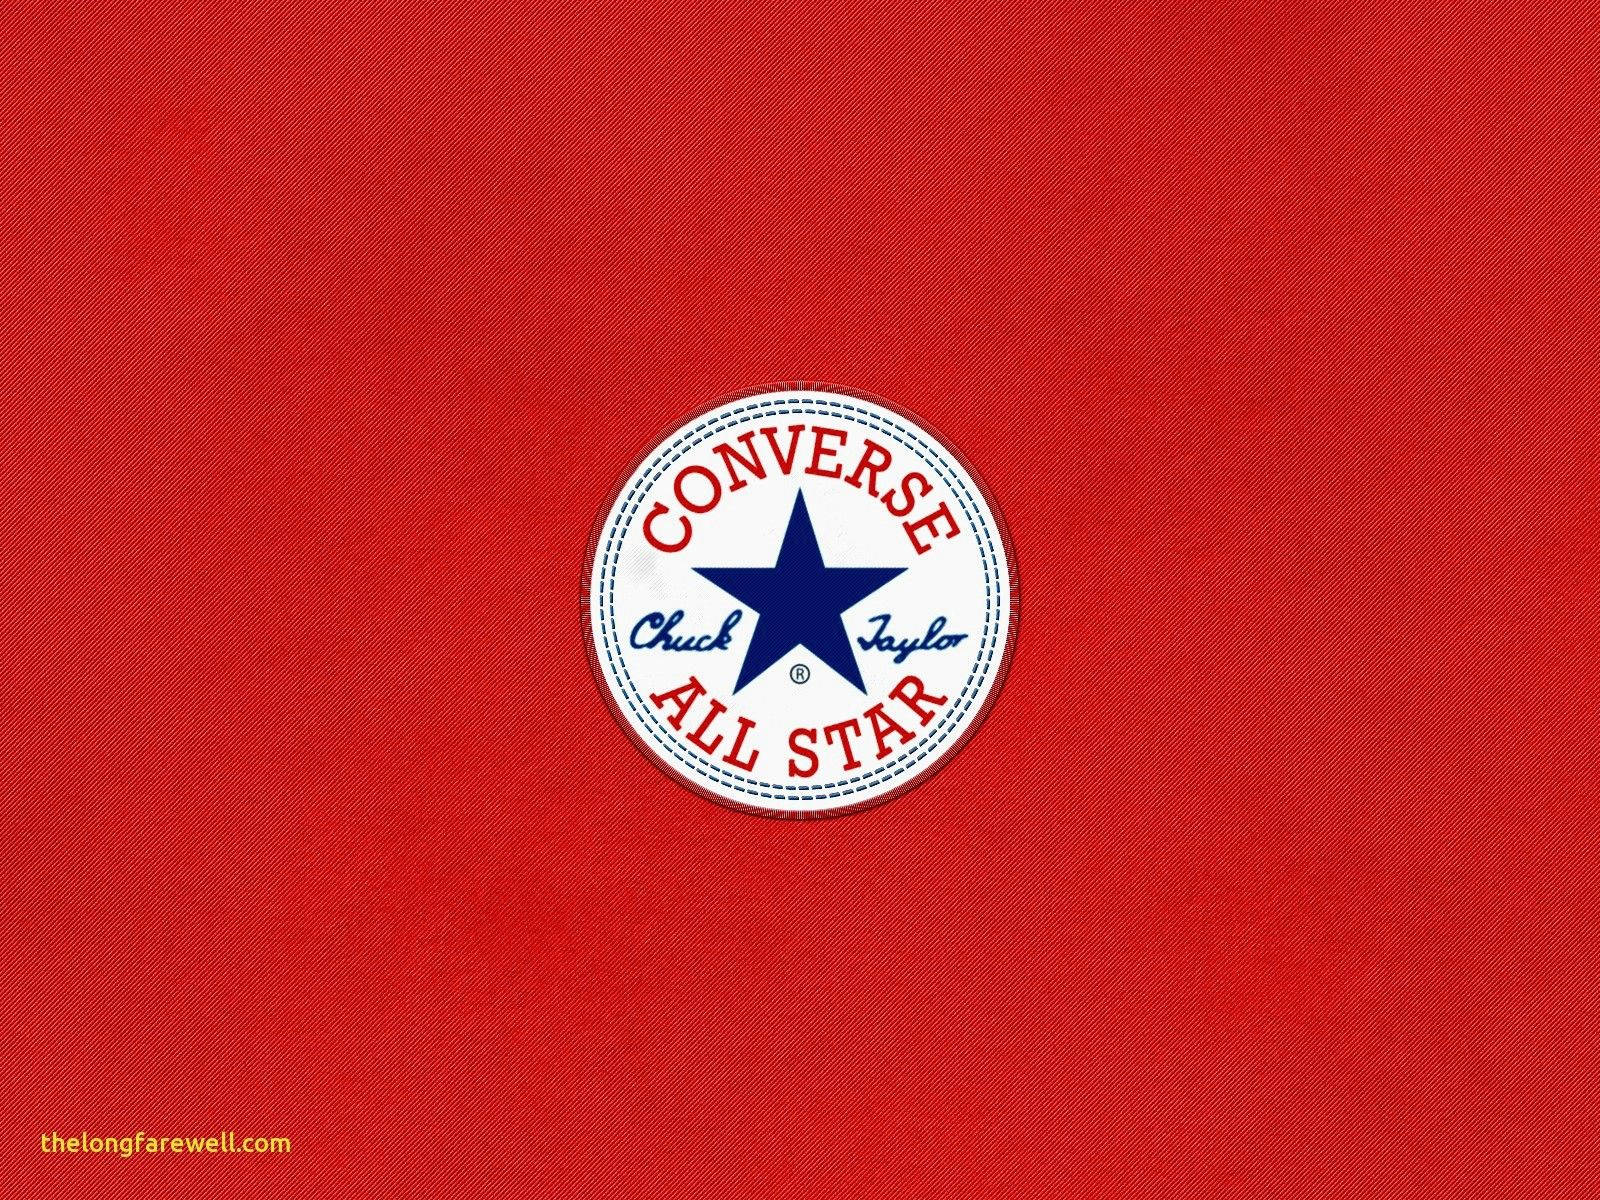 Converse Logo In Red Aesthetic Background